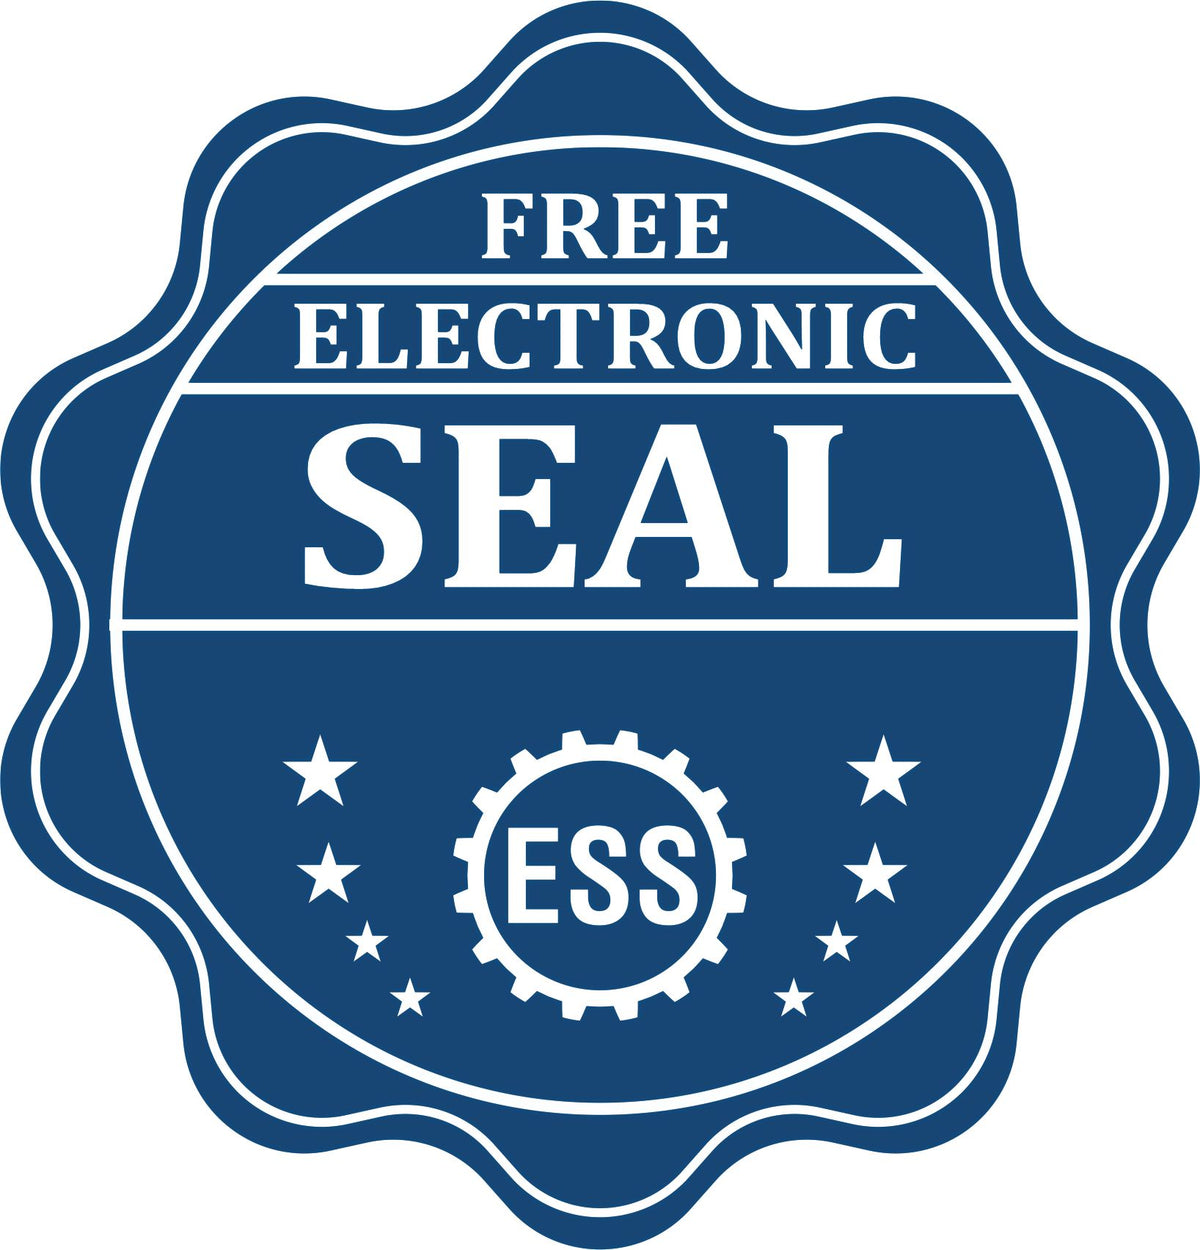 A badge showing a free electronic seal for the Gift Ohio Land Surveyor Seal with stars and the ESS gear on the emblem.